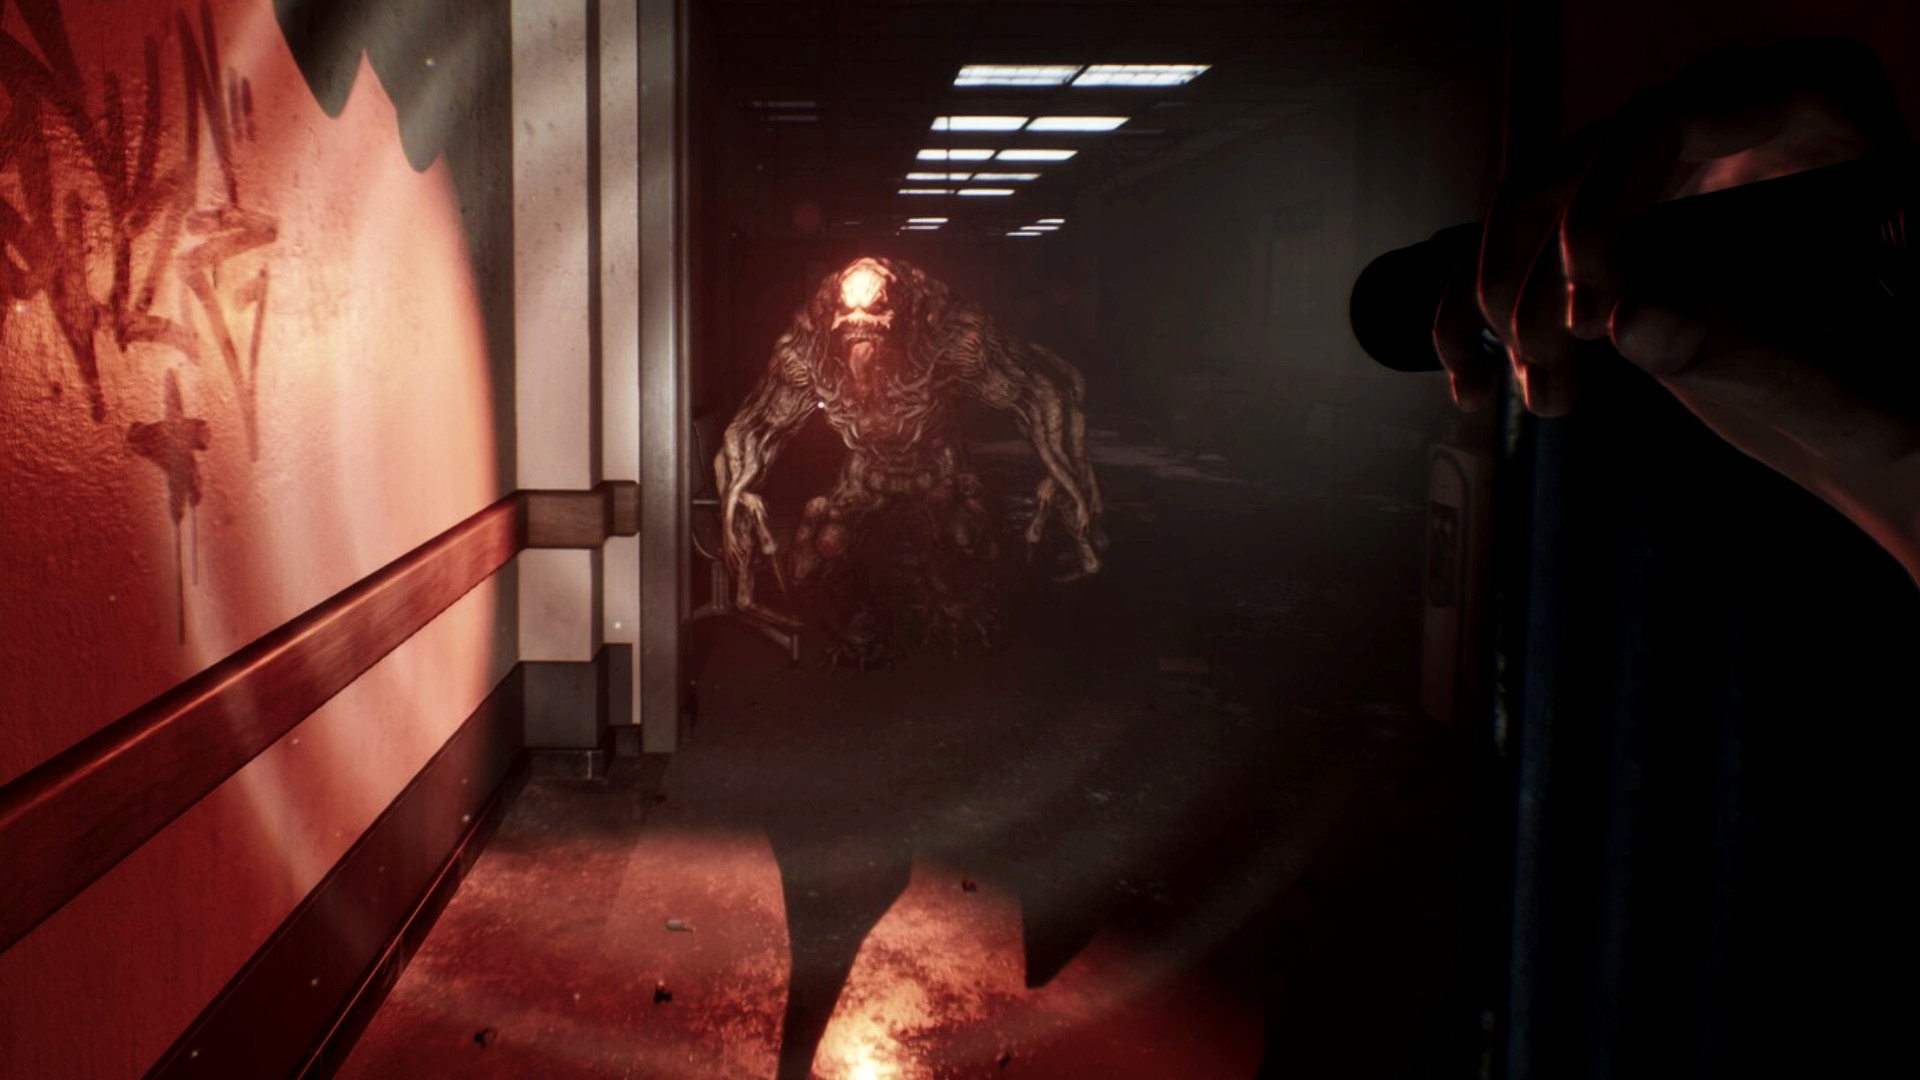 This tense co-op horror game just hit Steam, and it's under $5